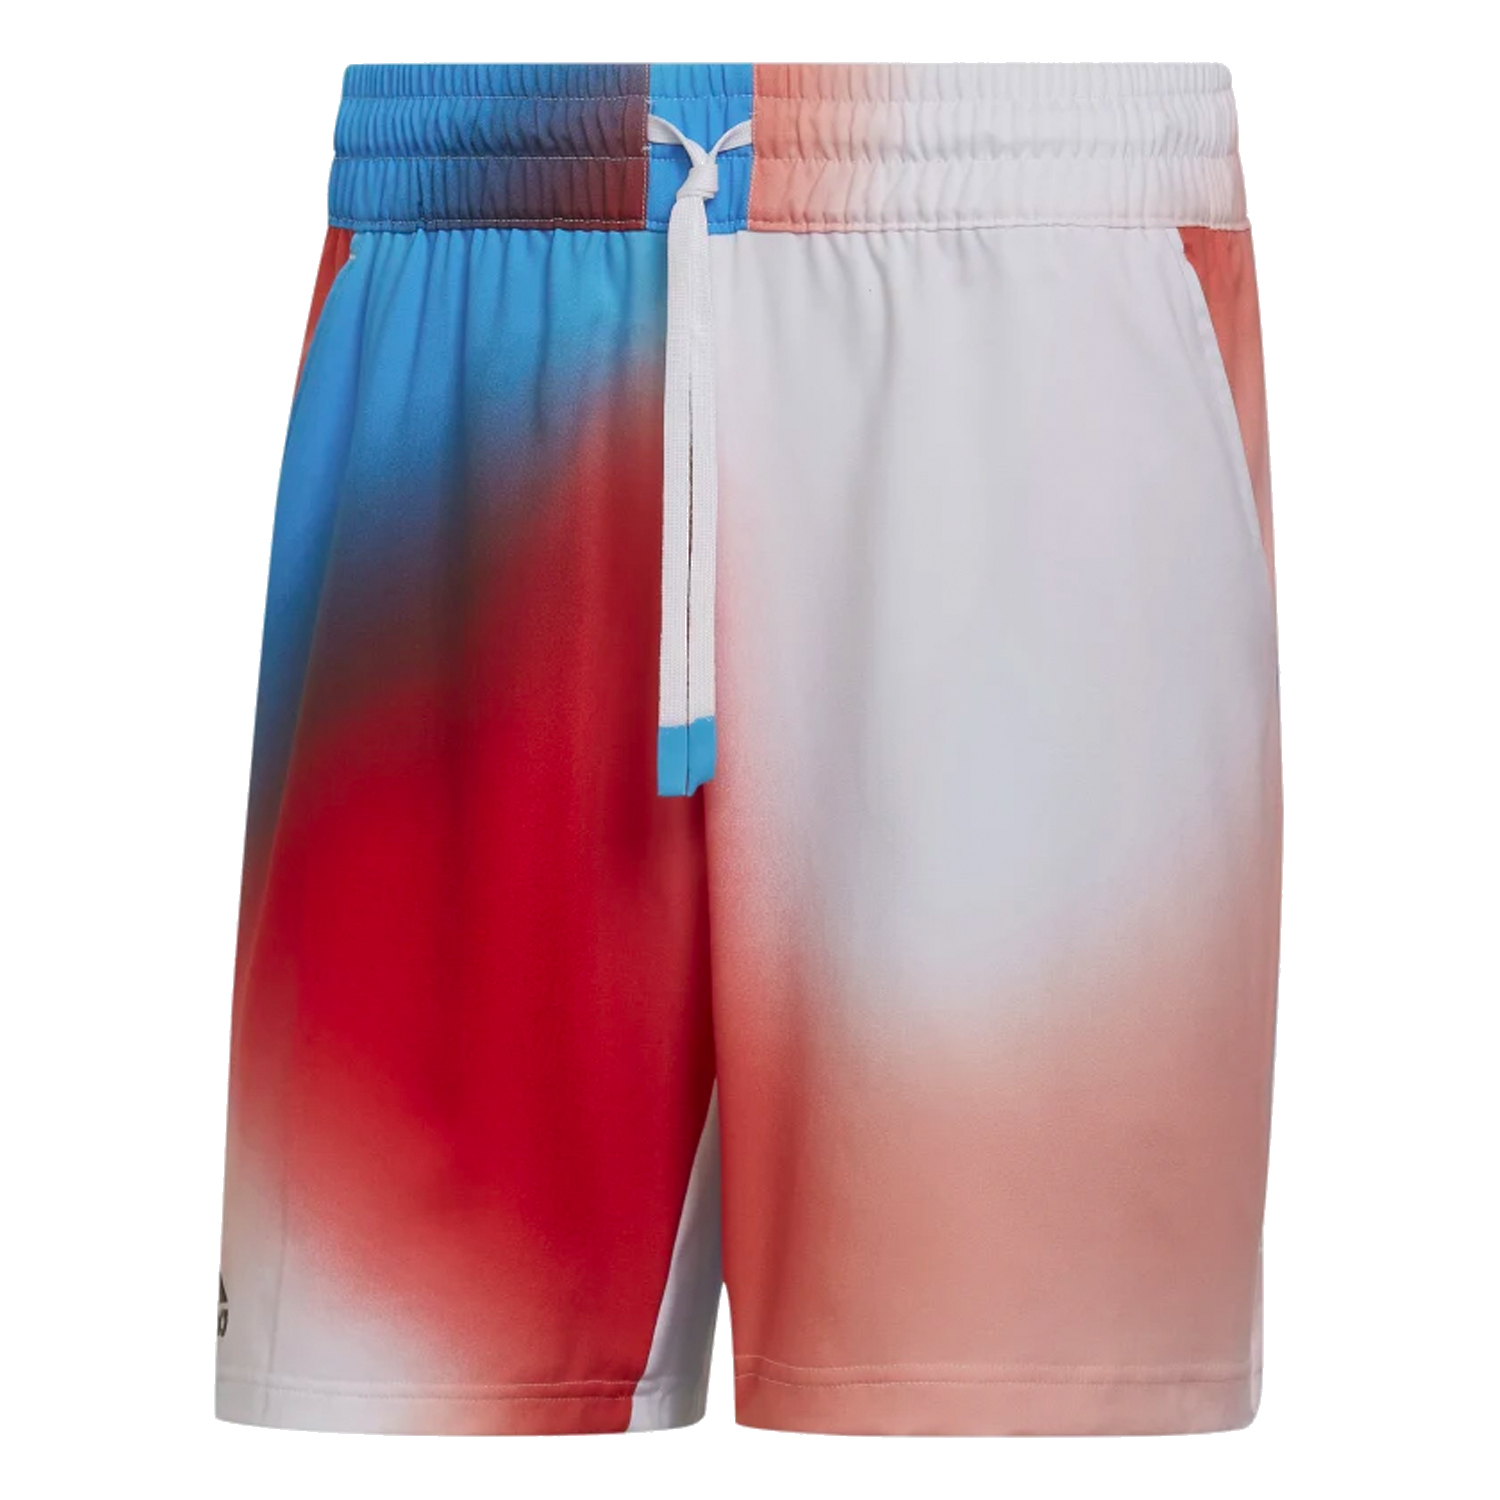 MELBOURNE TENNIS ERGO PRINTED 7-INCH SHORTS Red